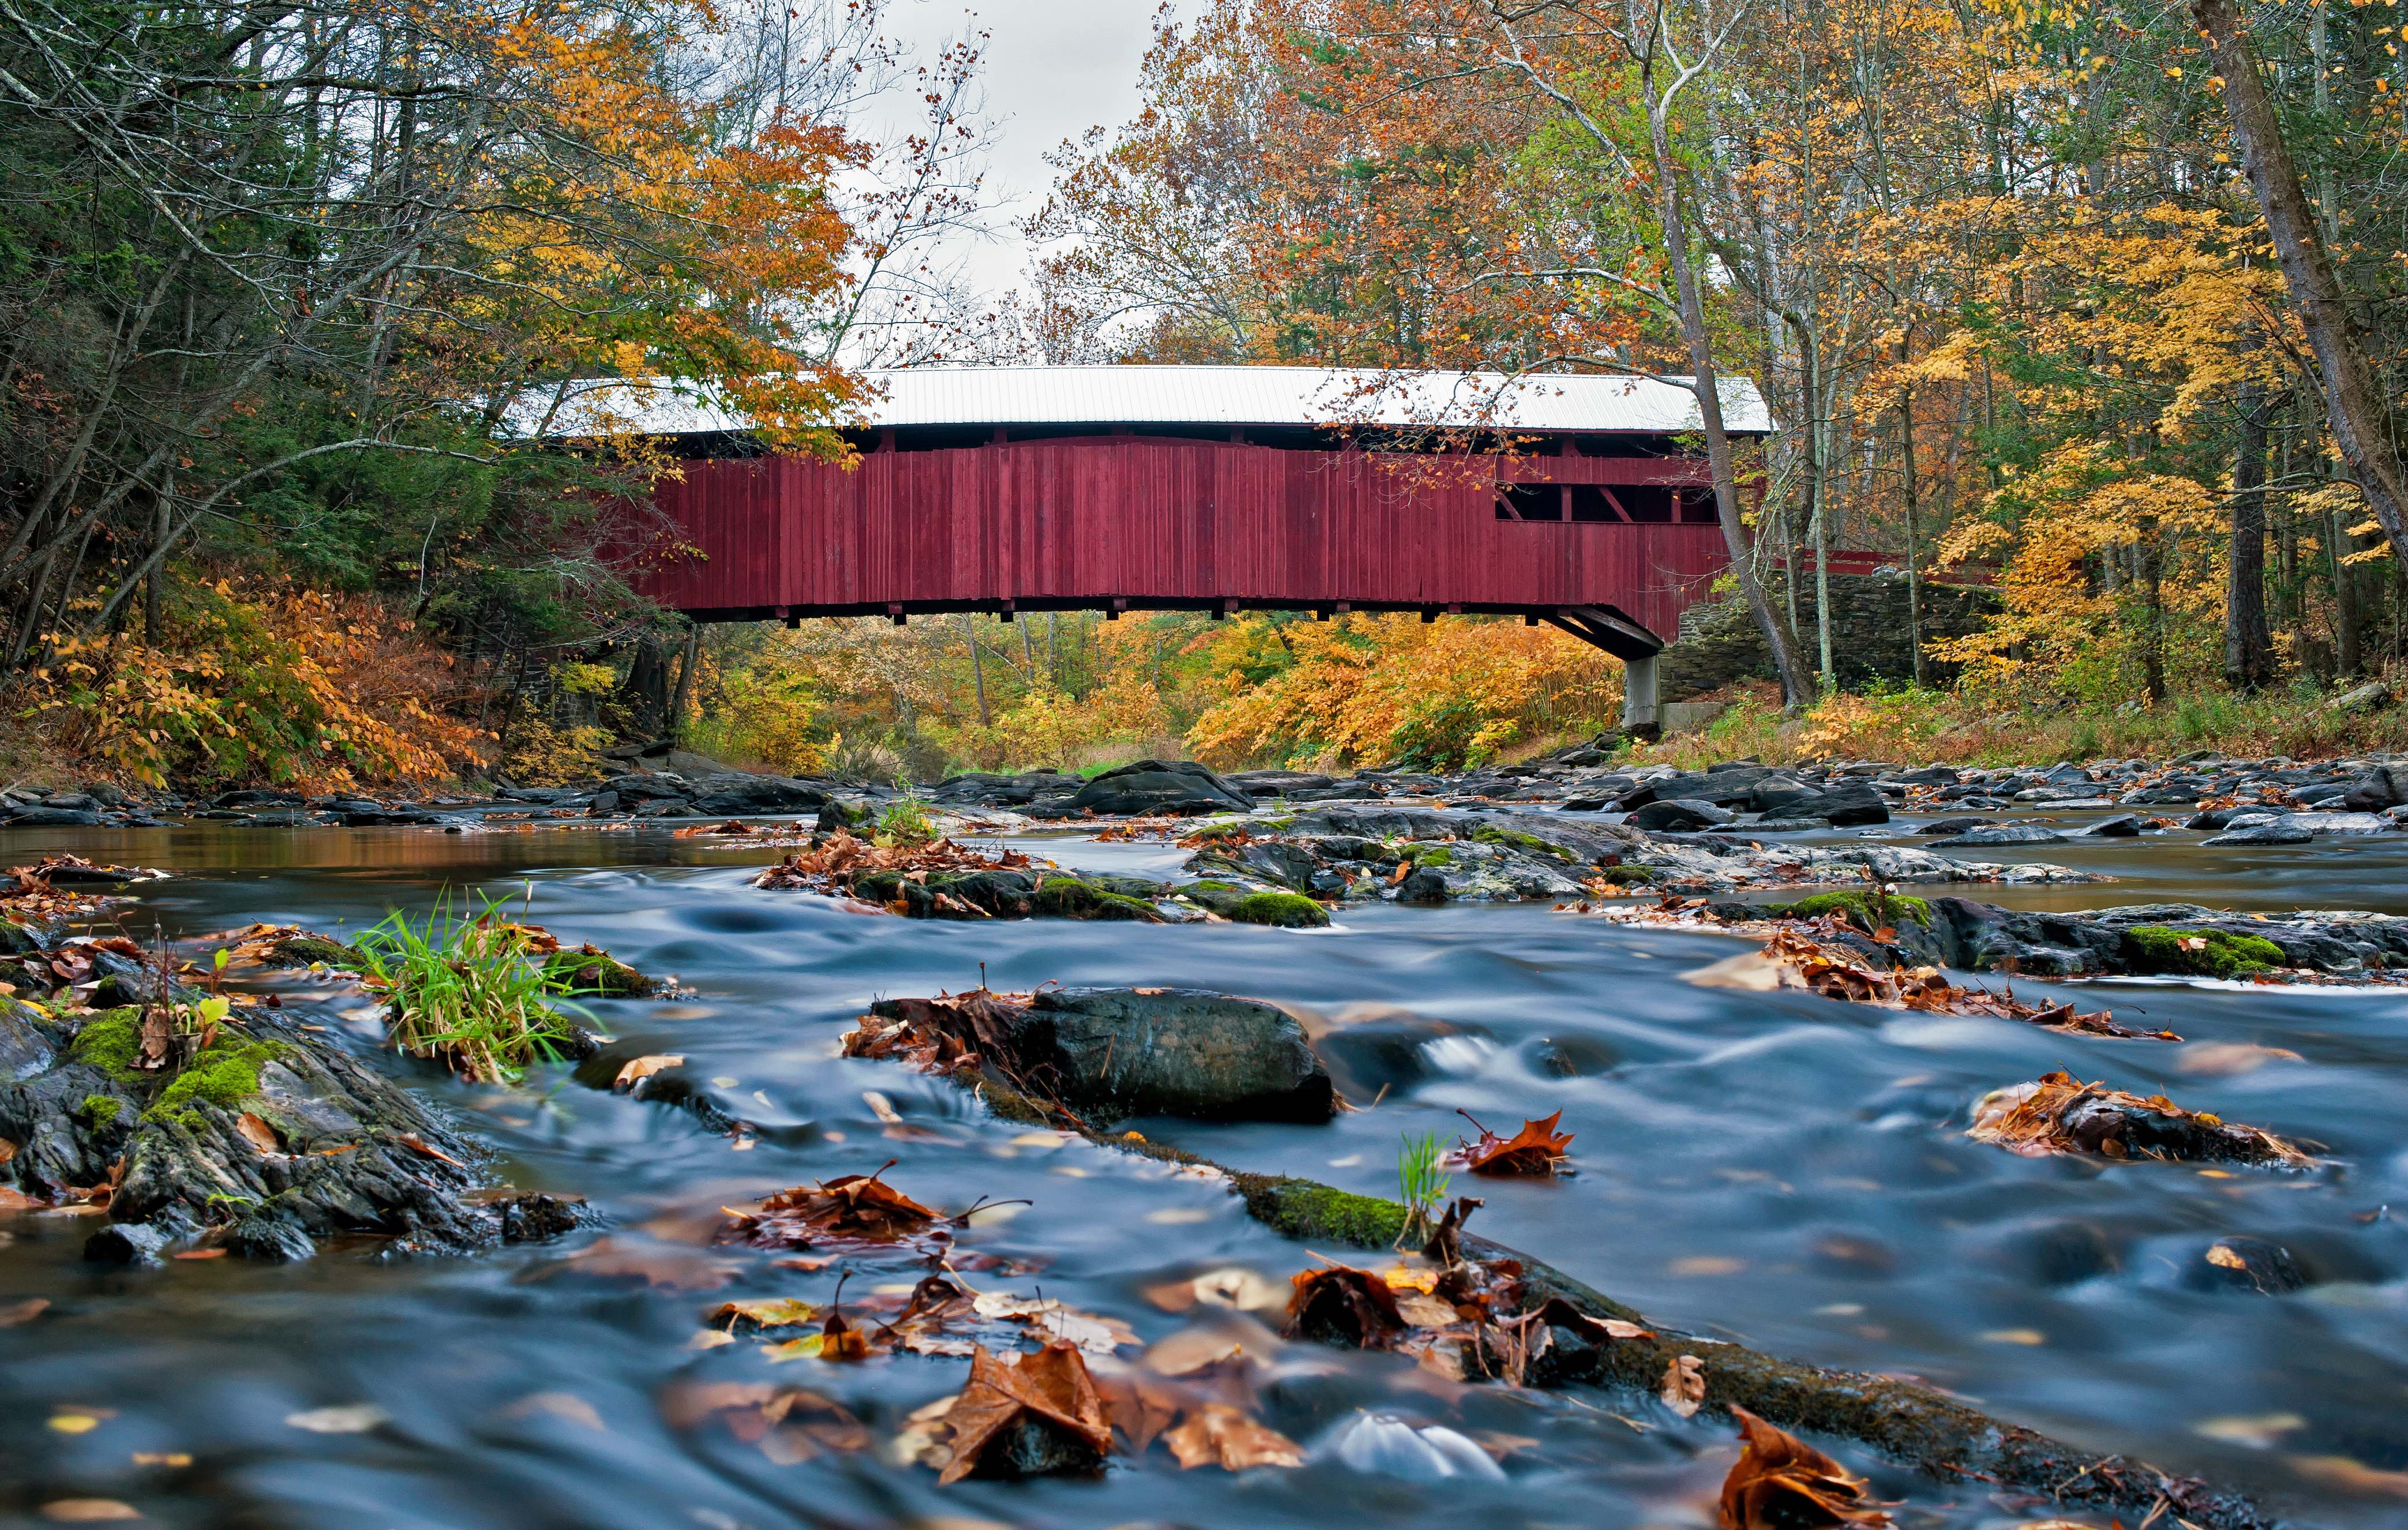 covered bridge with picturesque river underneath